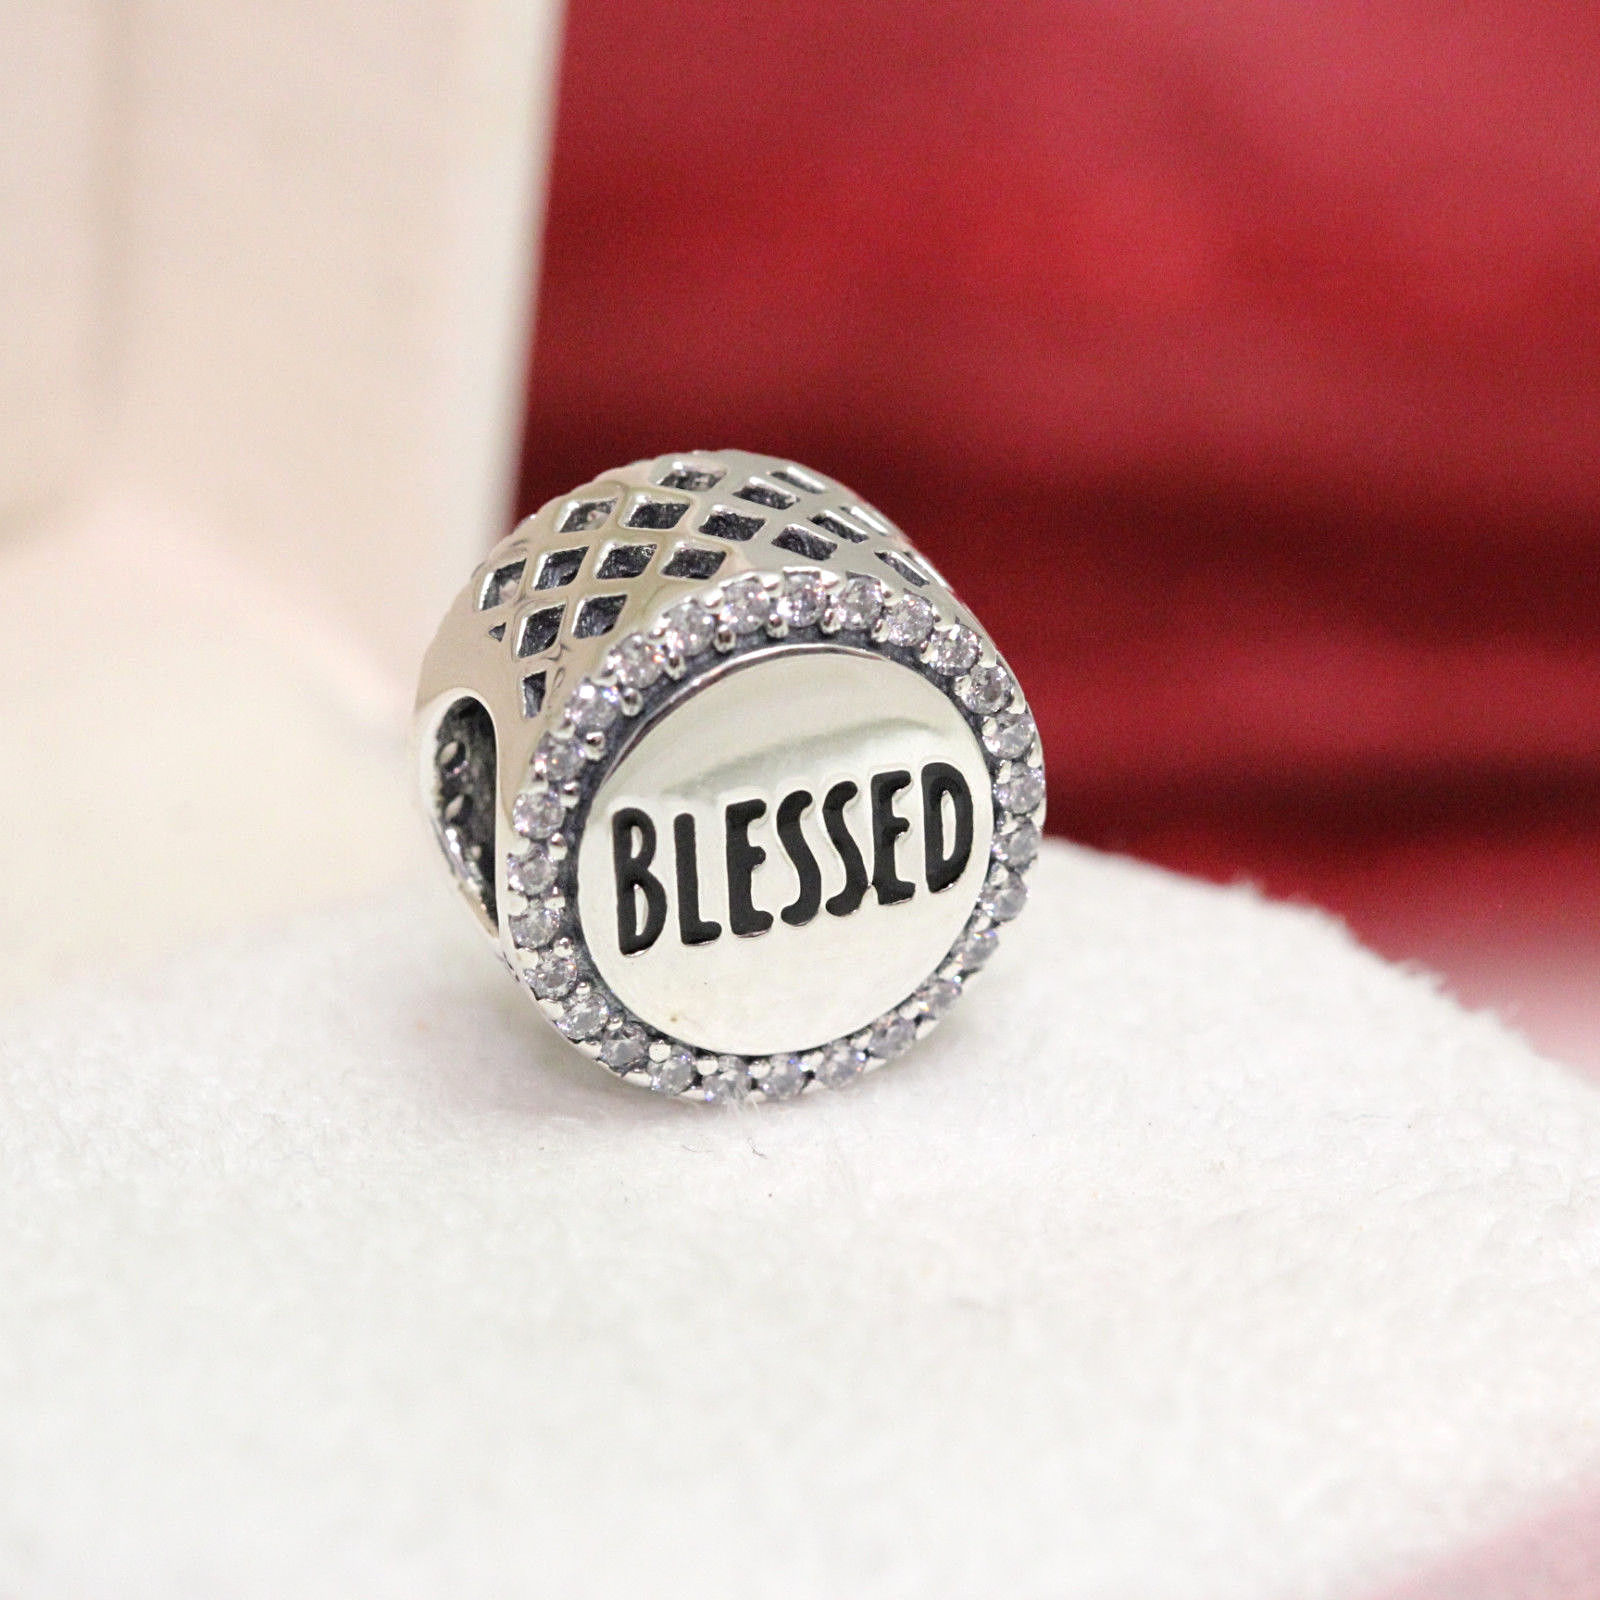 Primary image for  Genuine Pandora Blessed Silver Charm with Clear Cubic Zirconia ENG792016CZ3 NEW